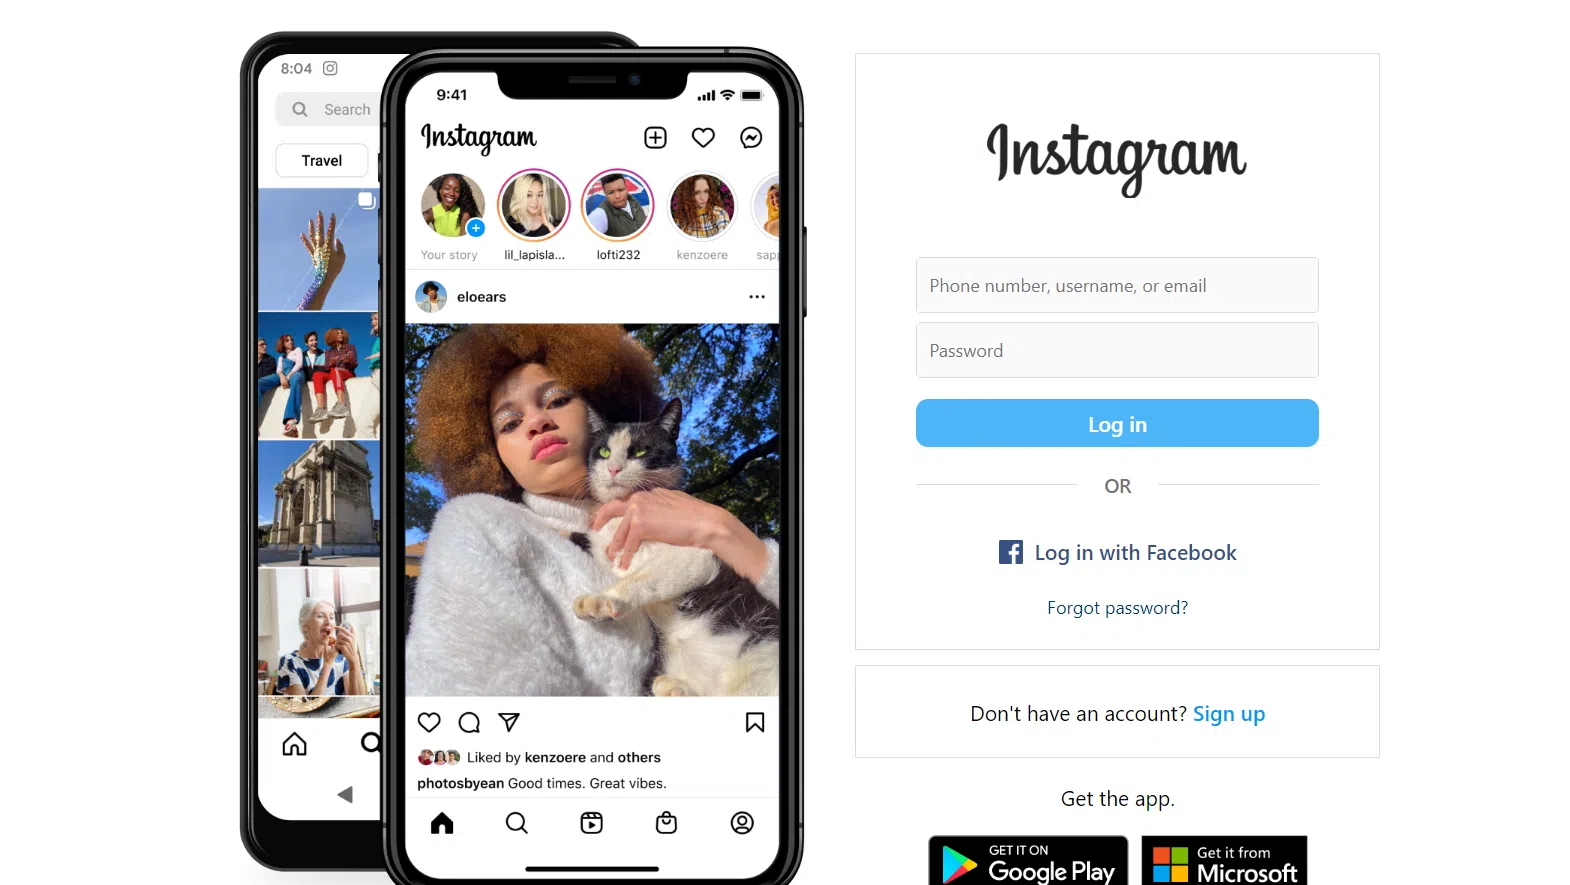 React Native Apps Examples – Instagram